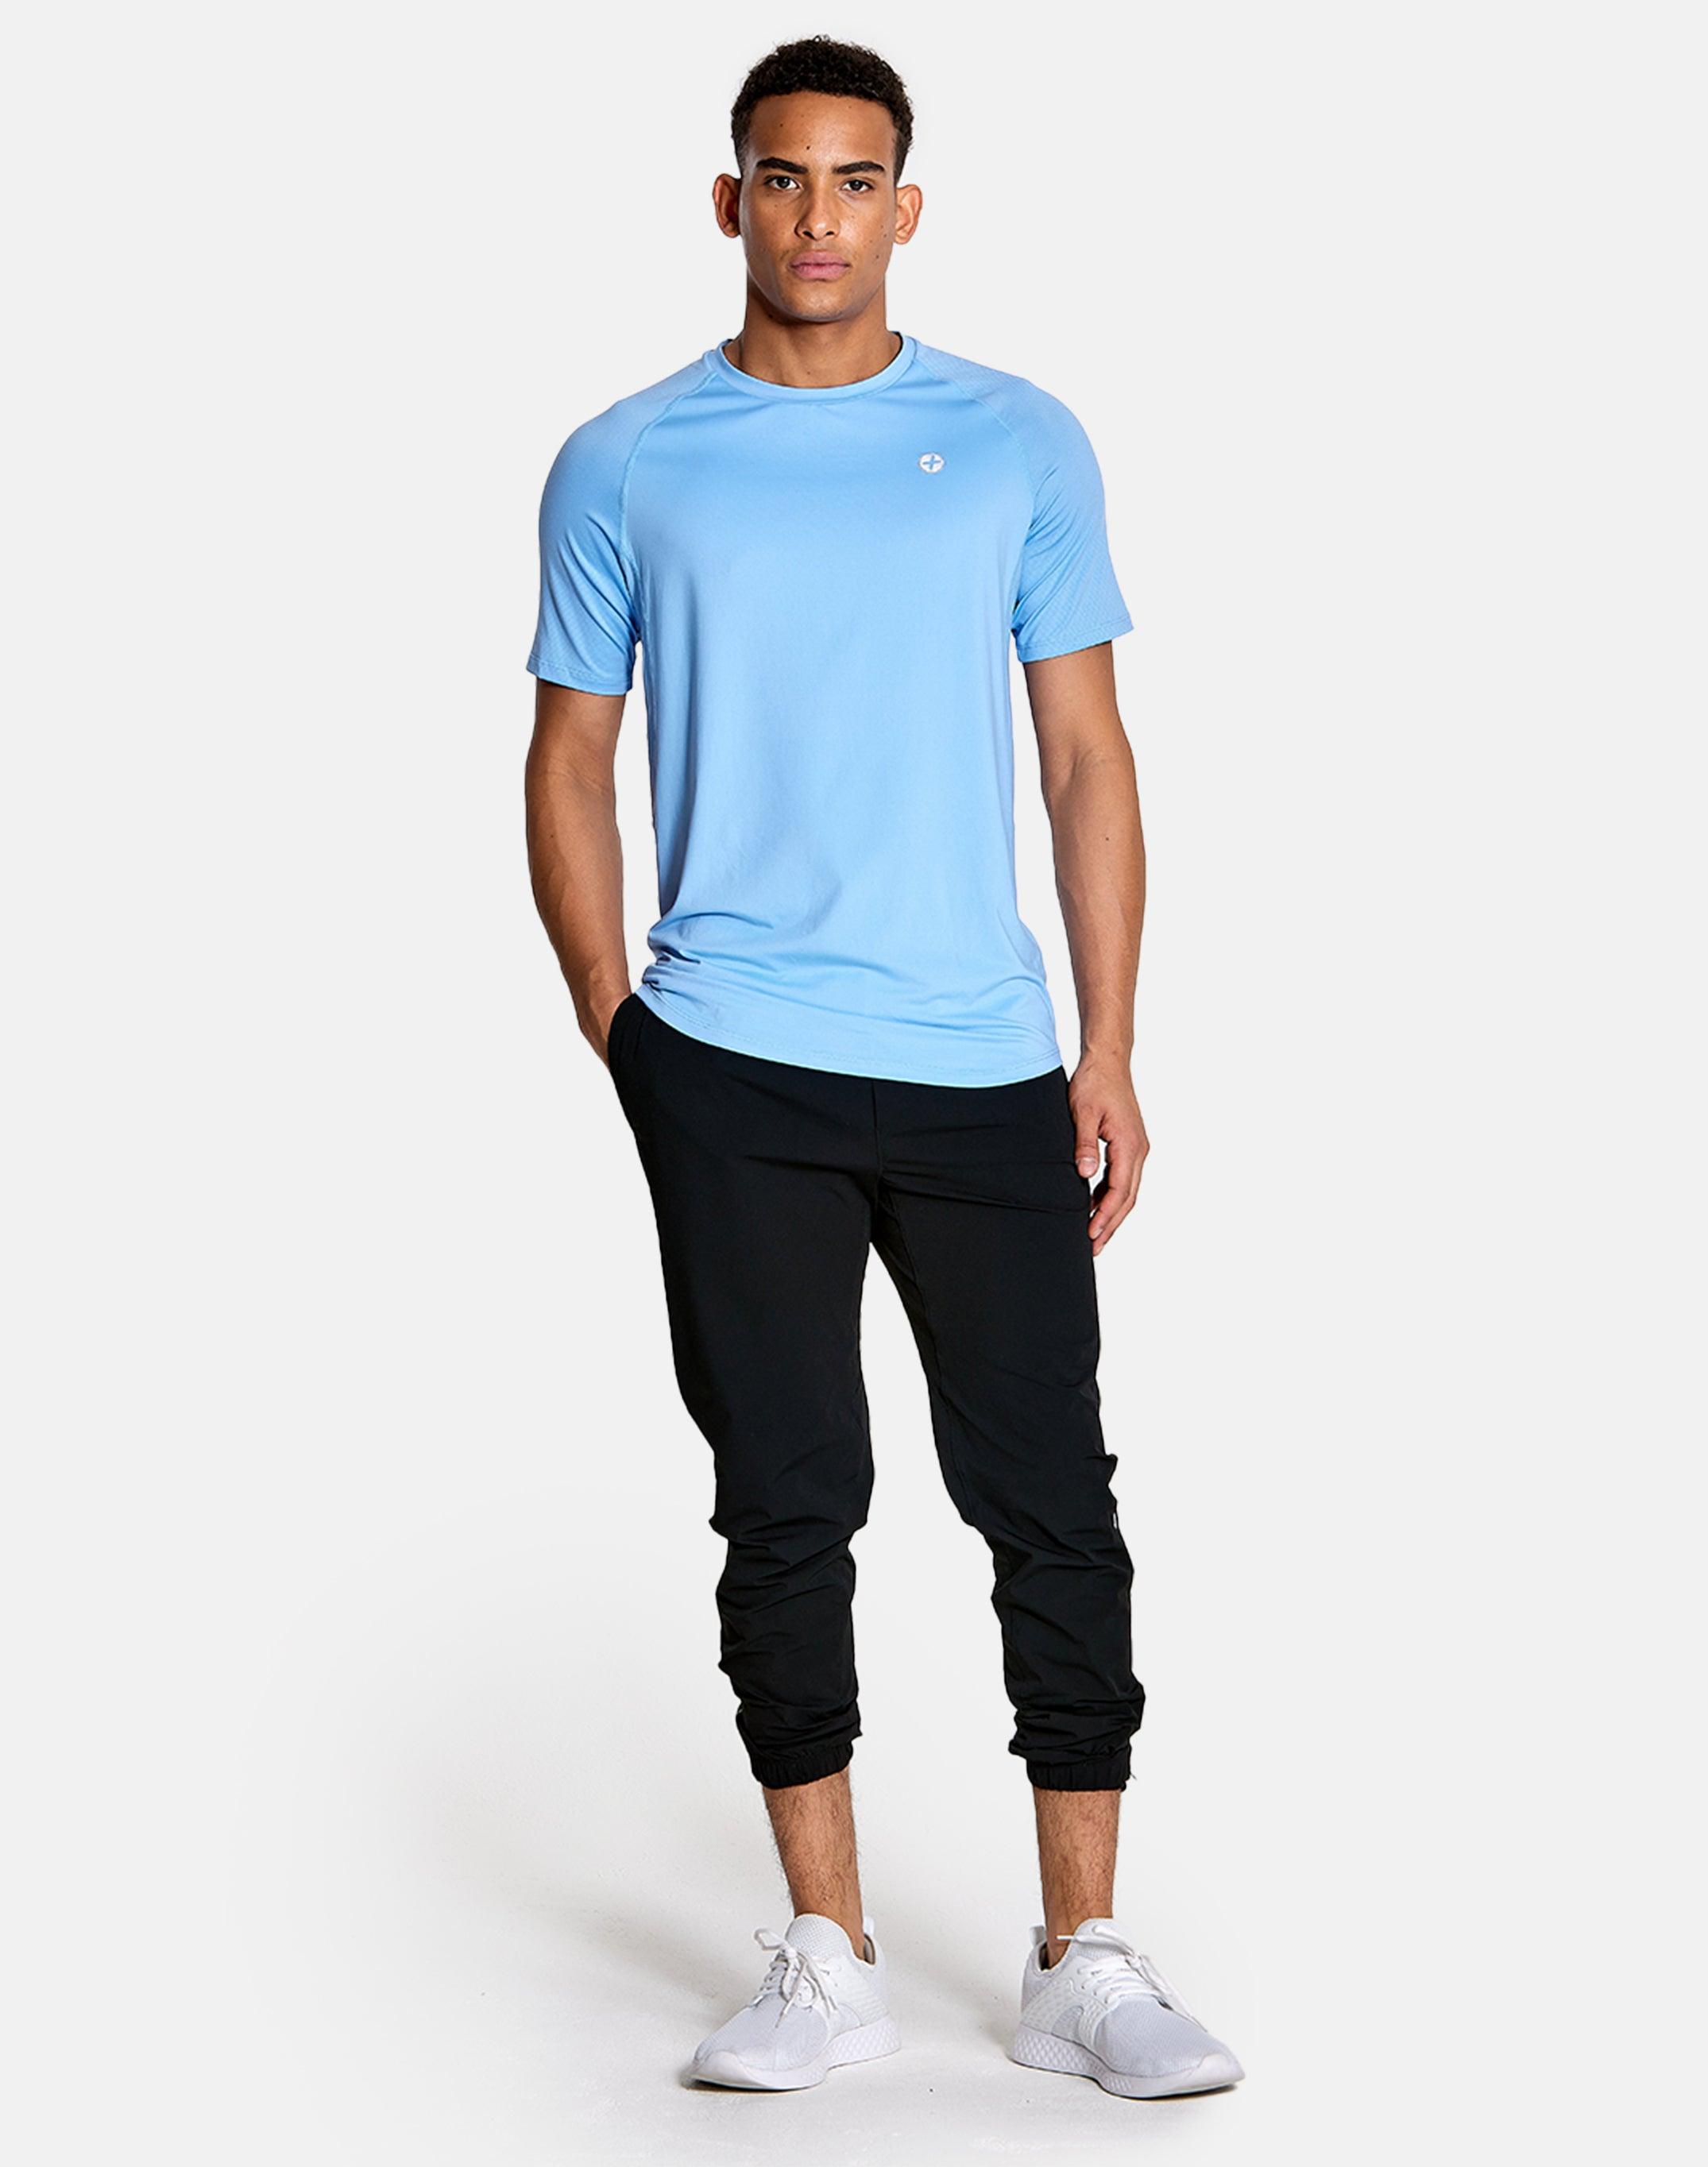 Surge Tee in Blue - T-Shirts - Gym+Coffee